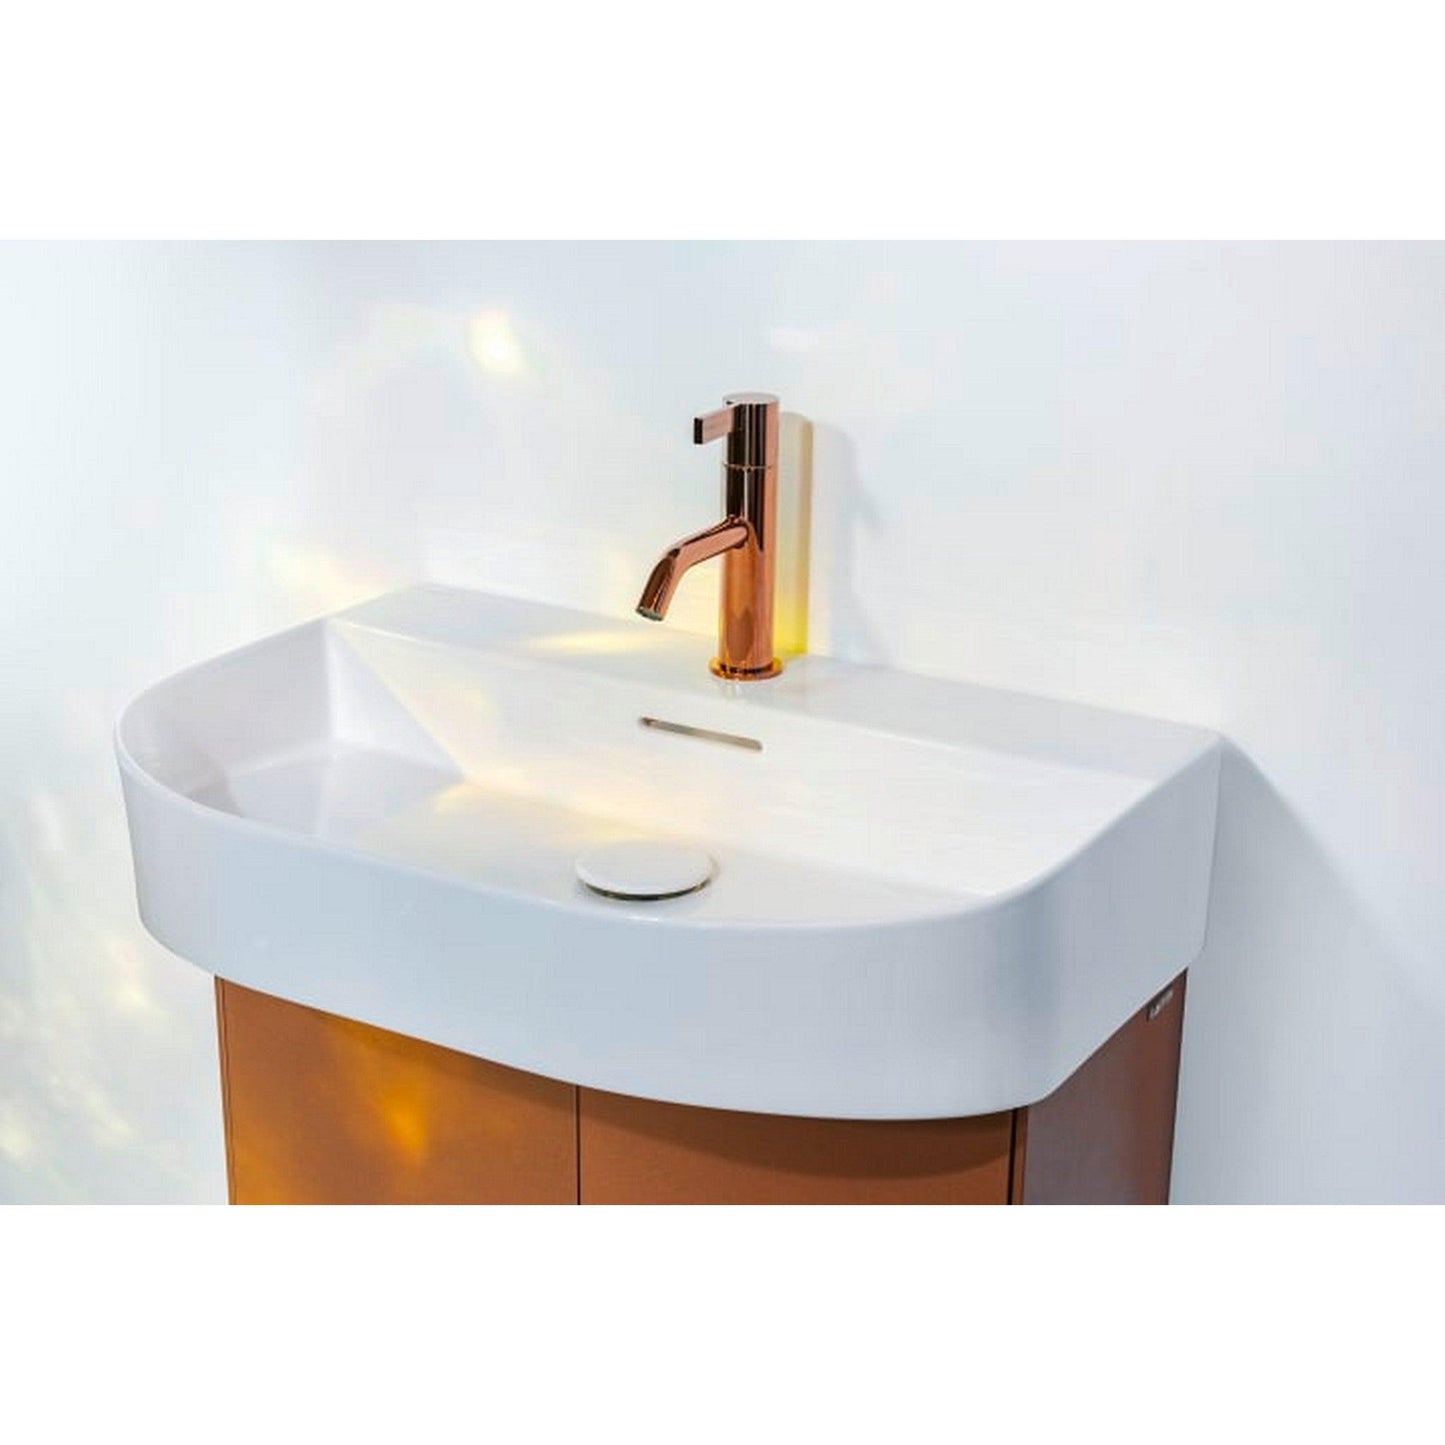 Laufen Sonar 24" Matte White Ceramic Countertop Bathroom Sink With With Faucet Hole